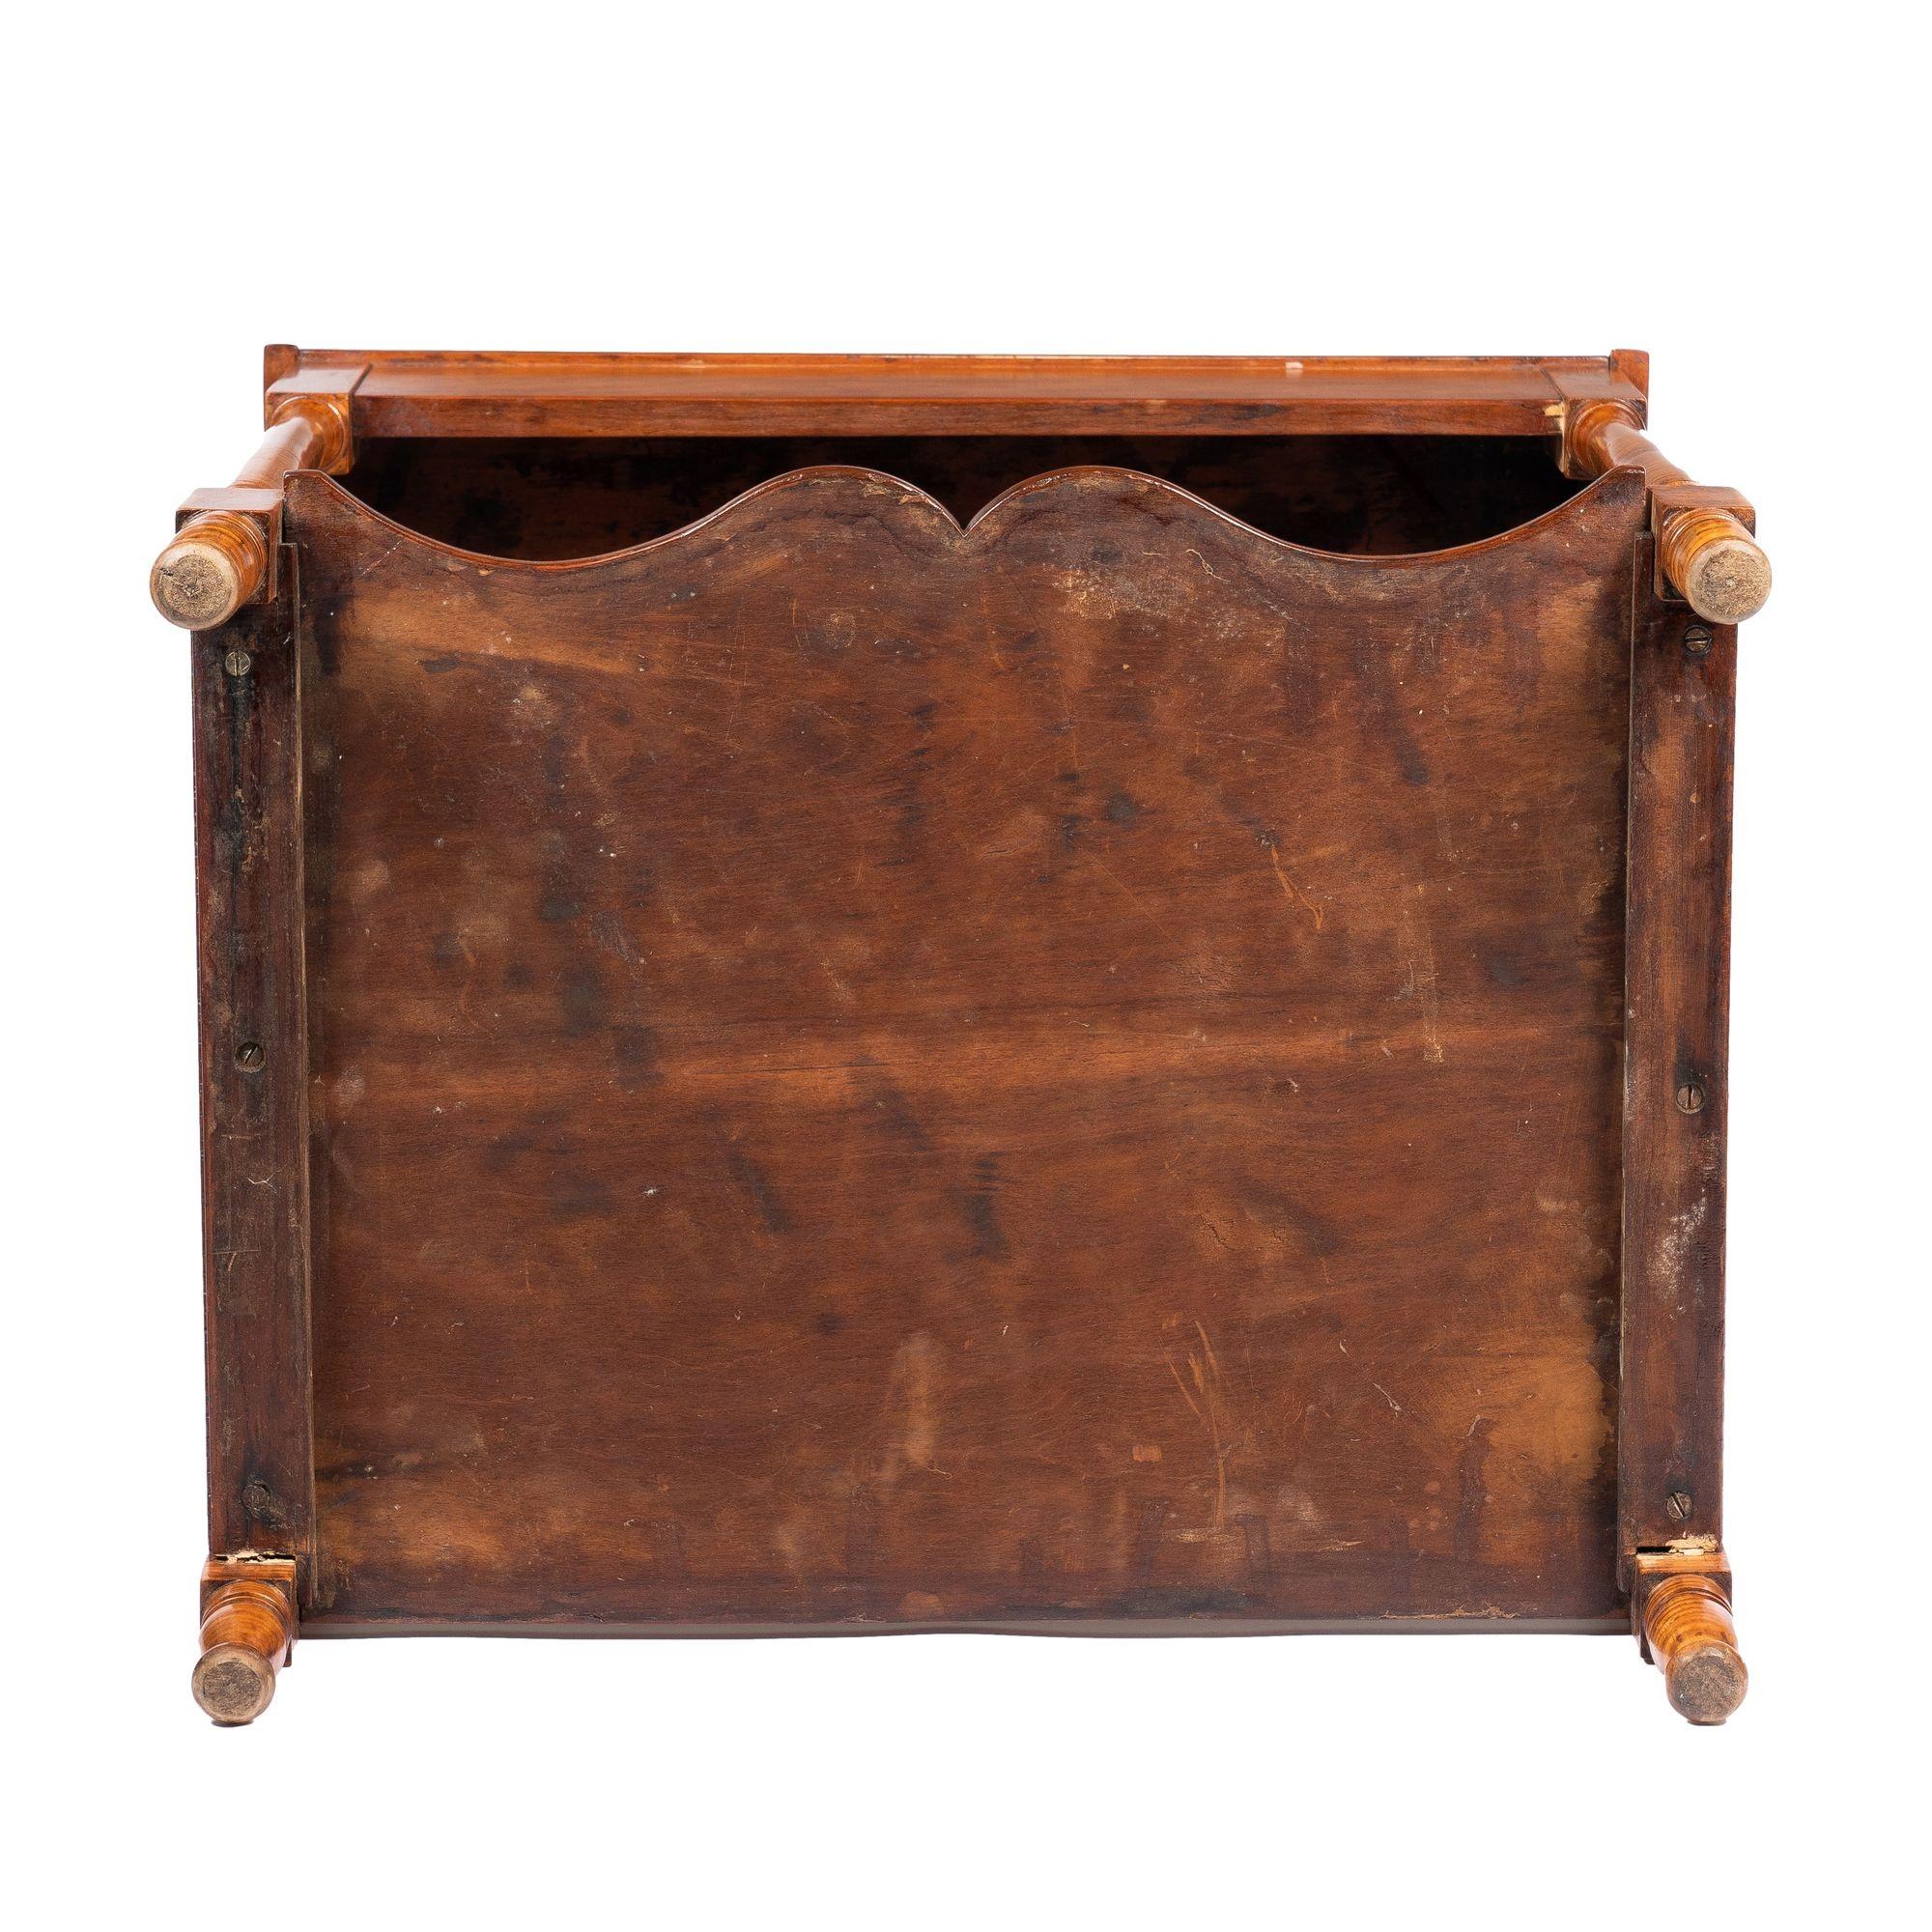 Philadelphia Cherry Wood Stand with Splash on a Conforming Apron, 1820 For Sale 7